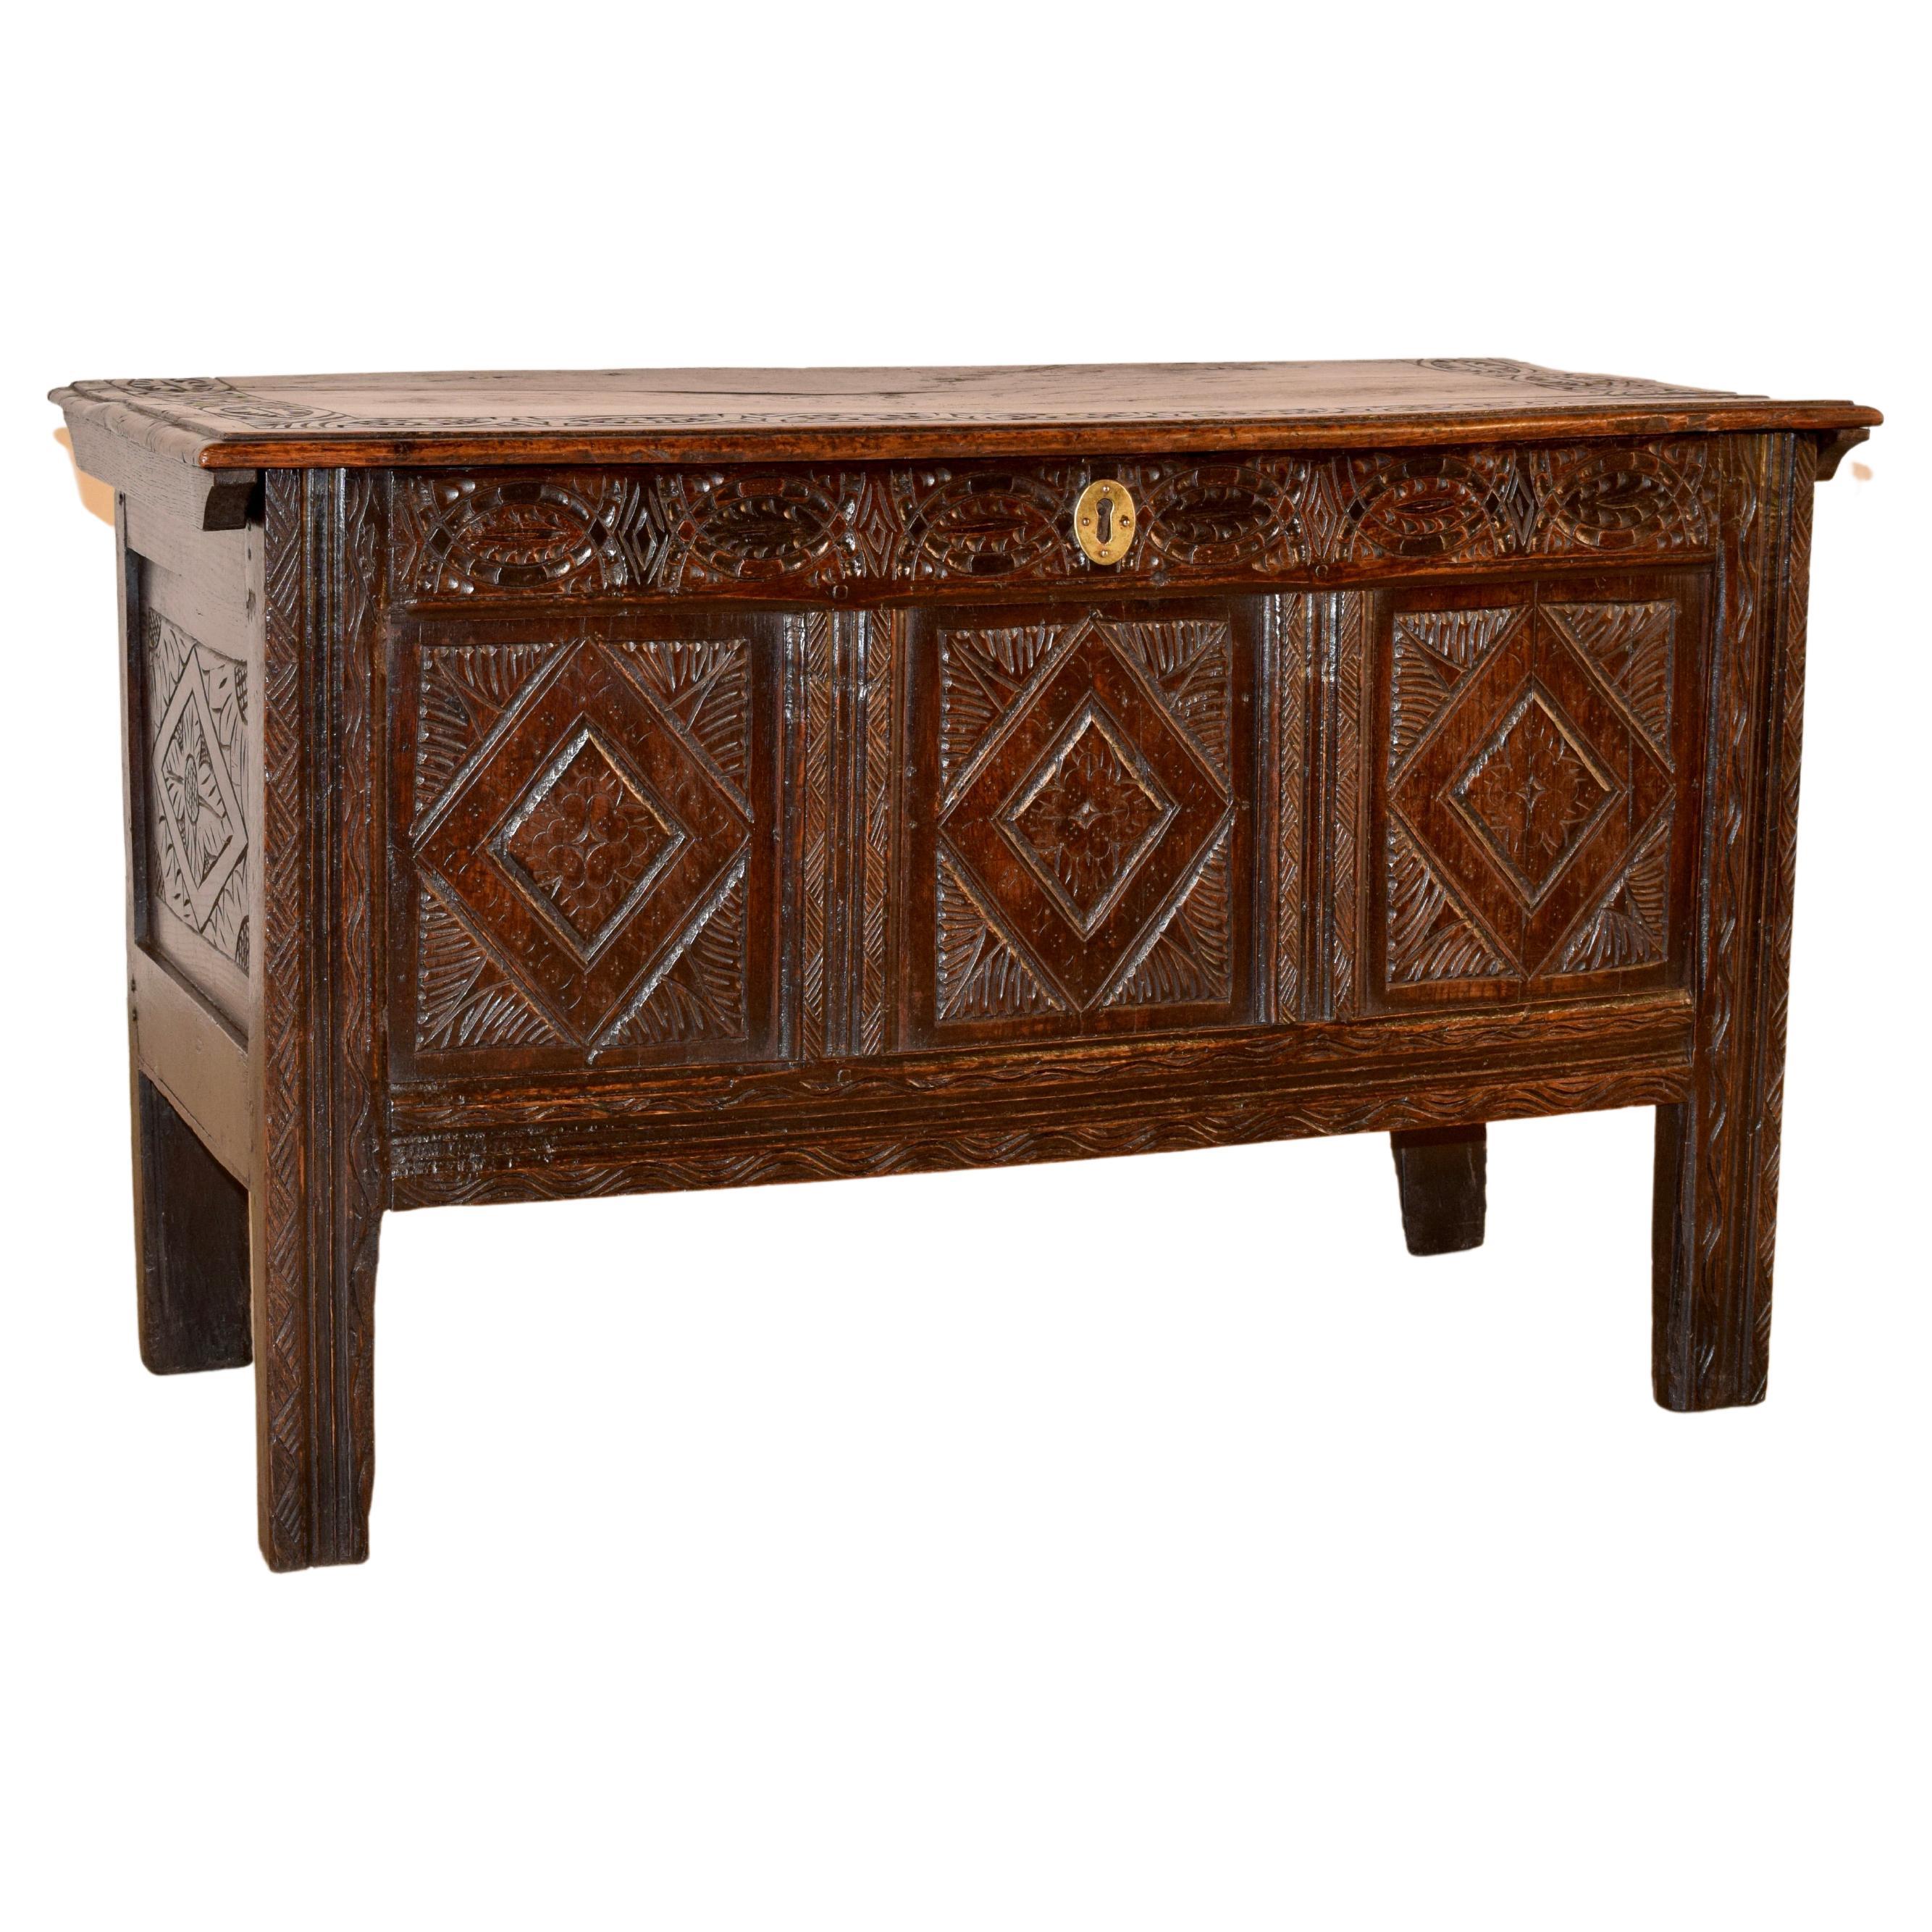 Late 17th-Early 18th Century Carved Blanket Chest